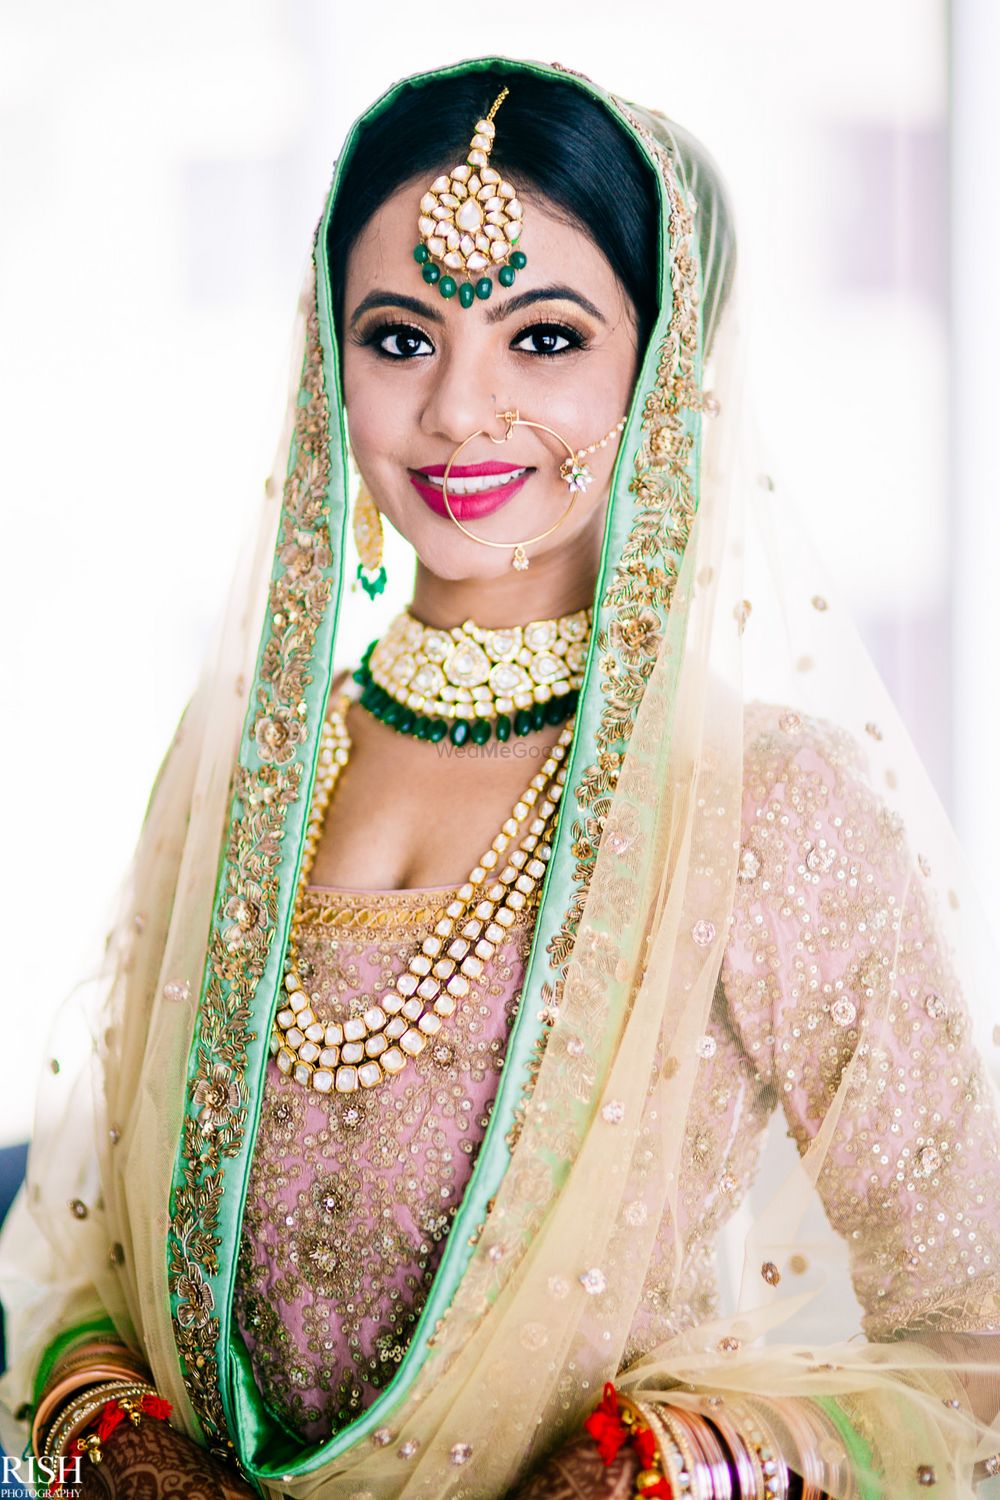 Photo of Pastel bride wearing contrasting jewellery with green beads